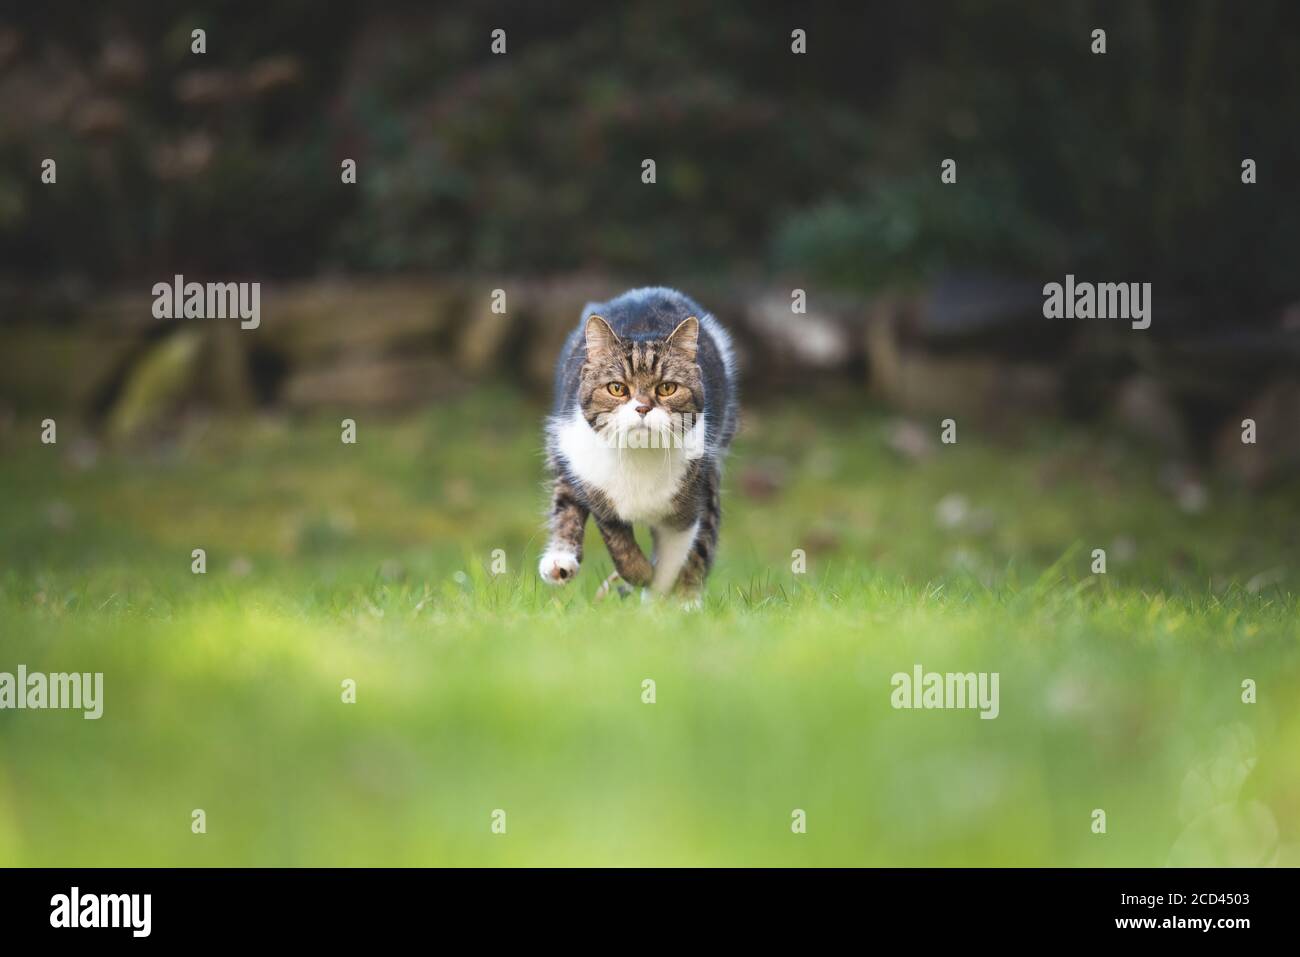 front view of a tabby british shorthair cat running towards camera in high speed mode surrounded by botany Stock Photo